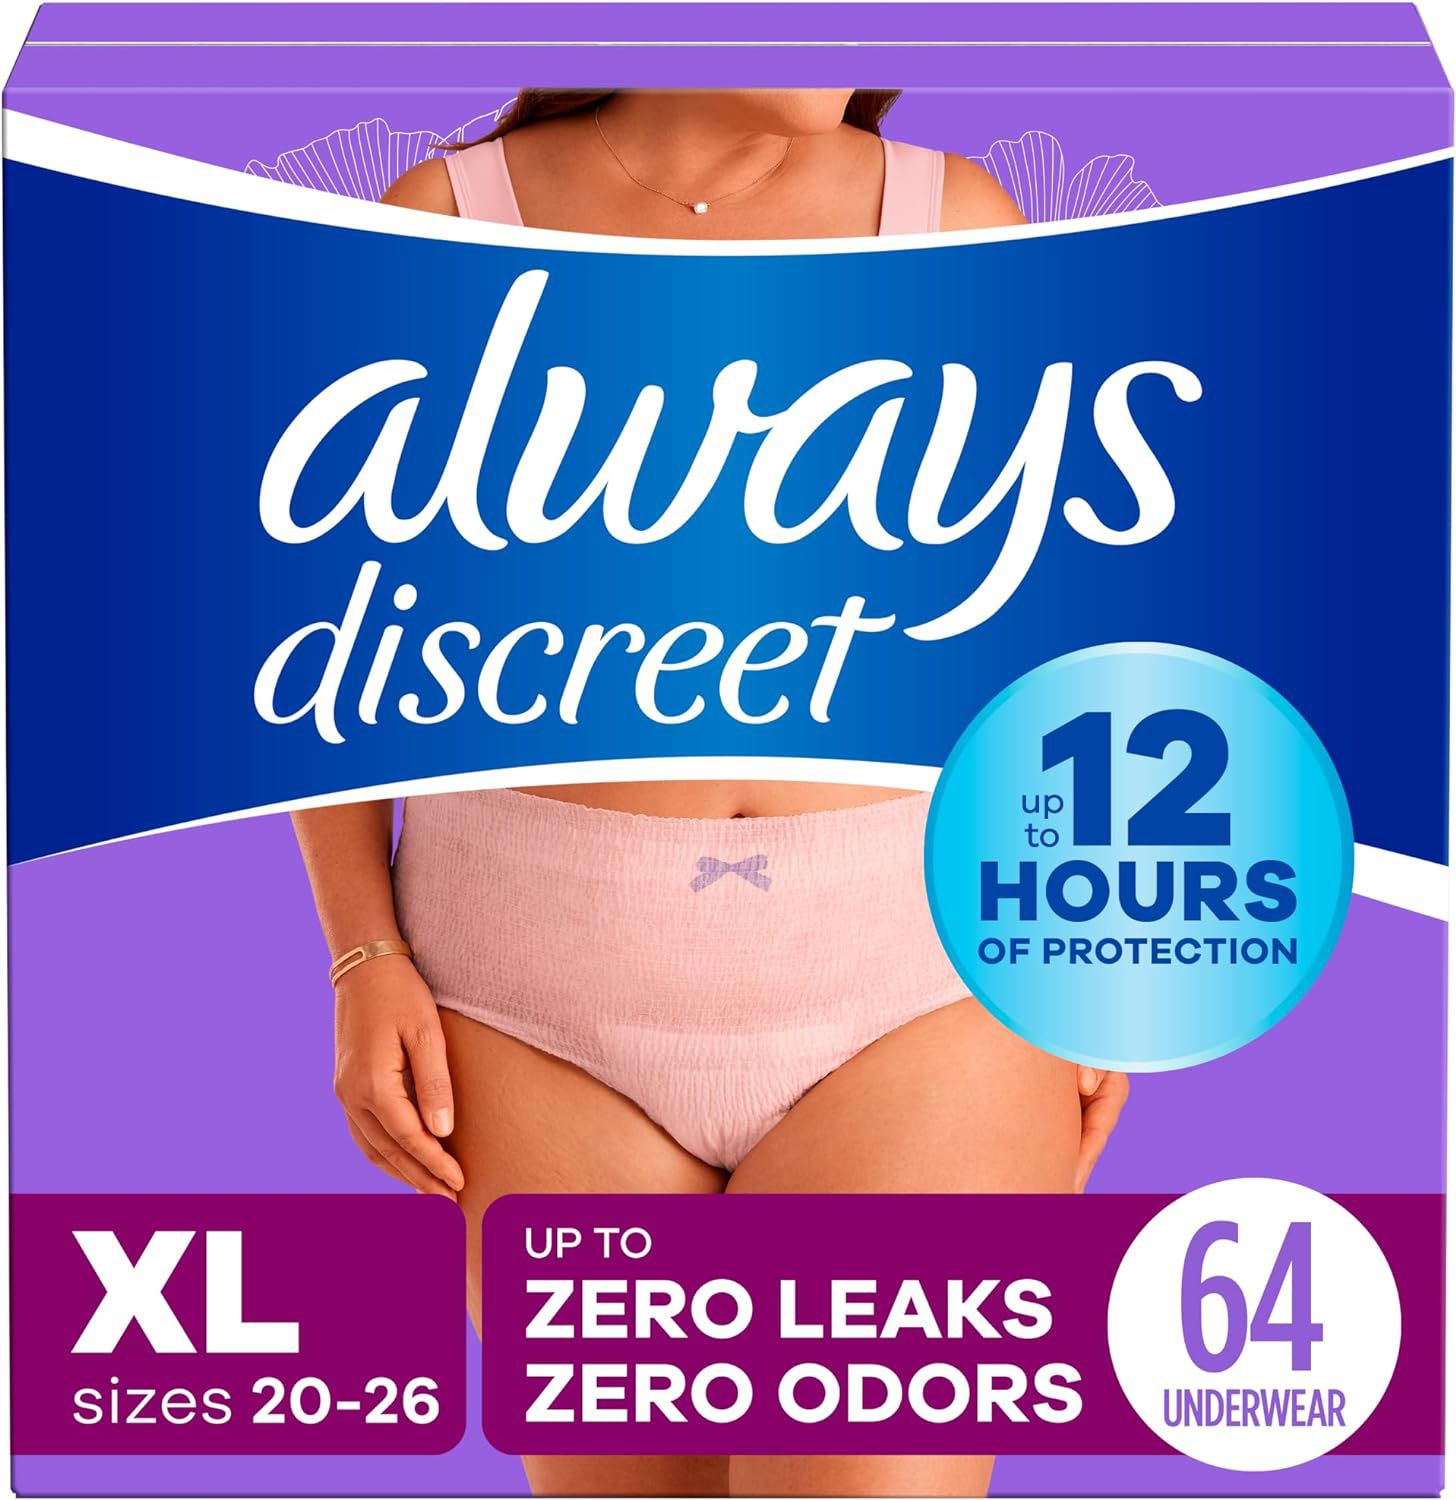 Always Discreet Adult Incontinence Underwear for Women and Postpartum Underwear, XL, up to 100% Bladder Leak Protection, 64 Count (Packaging May Vary)